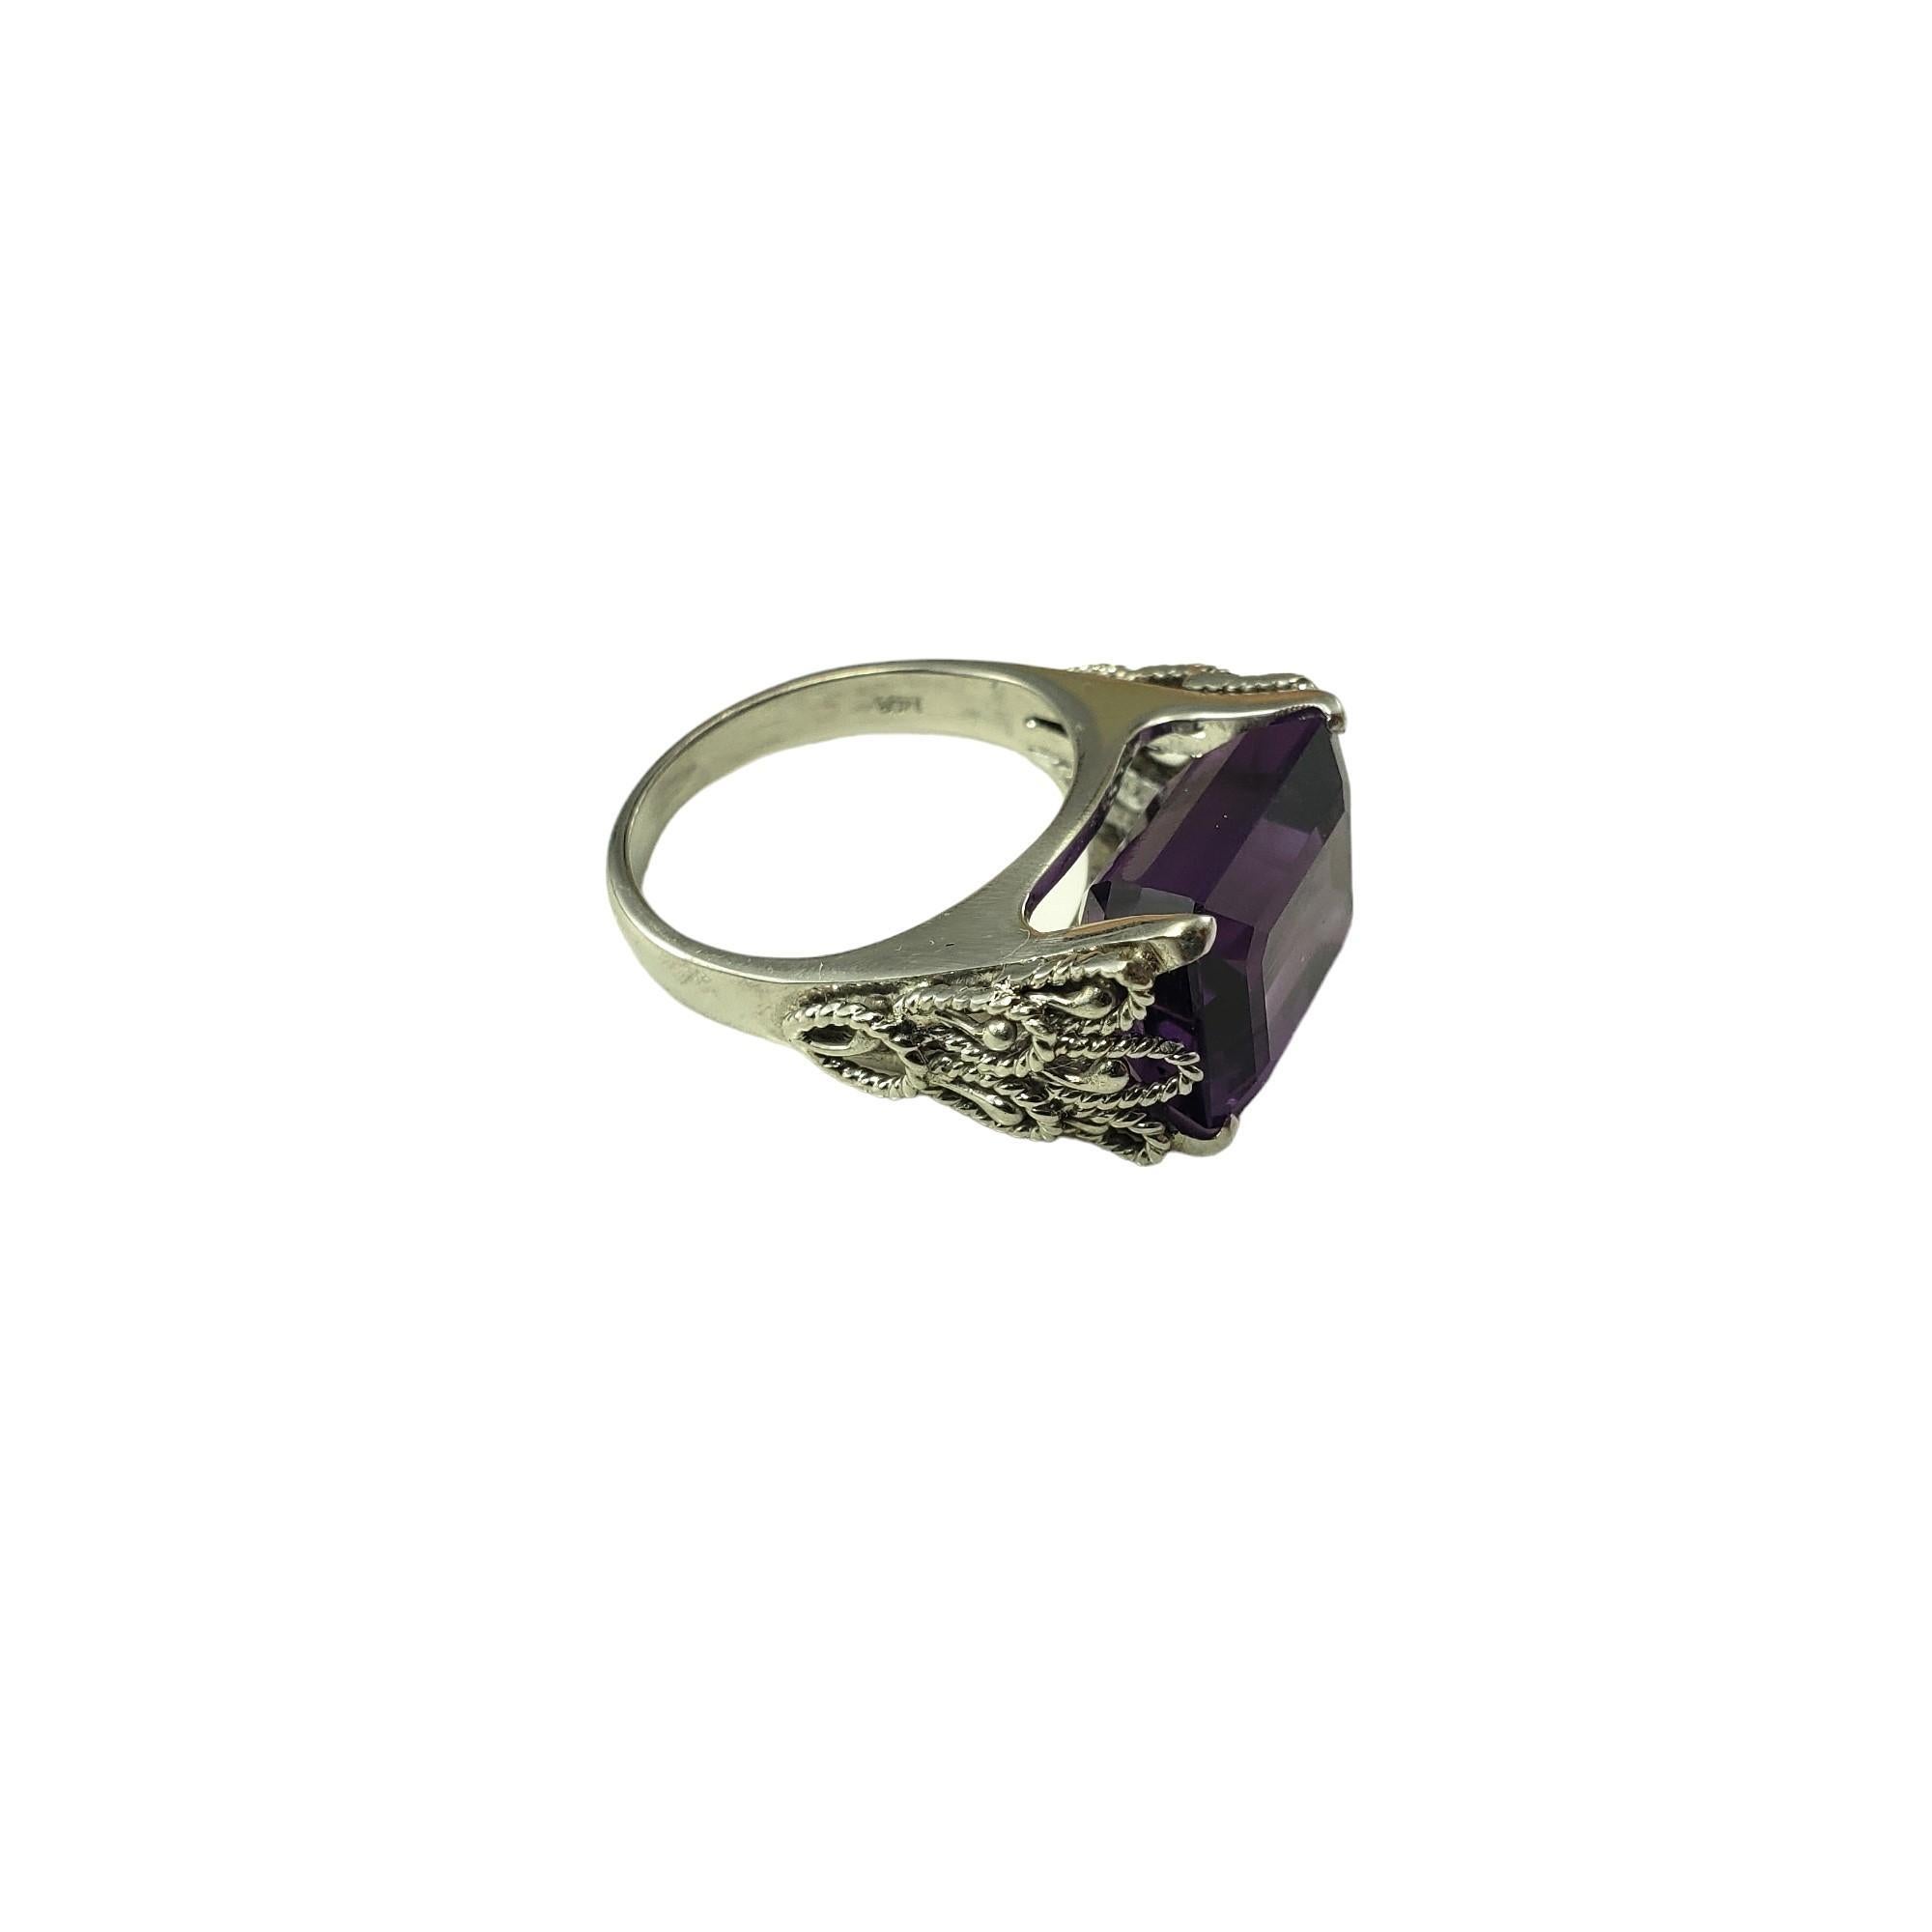 Emerald Cut 14K White Gold Amethyst Ring Size 6.75 #15459 For Sale